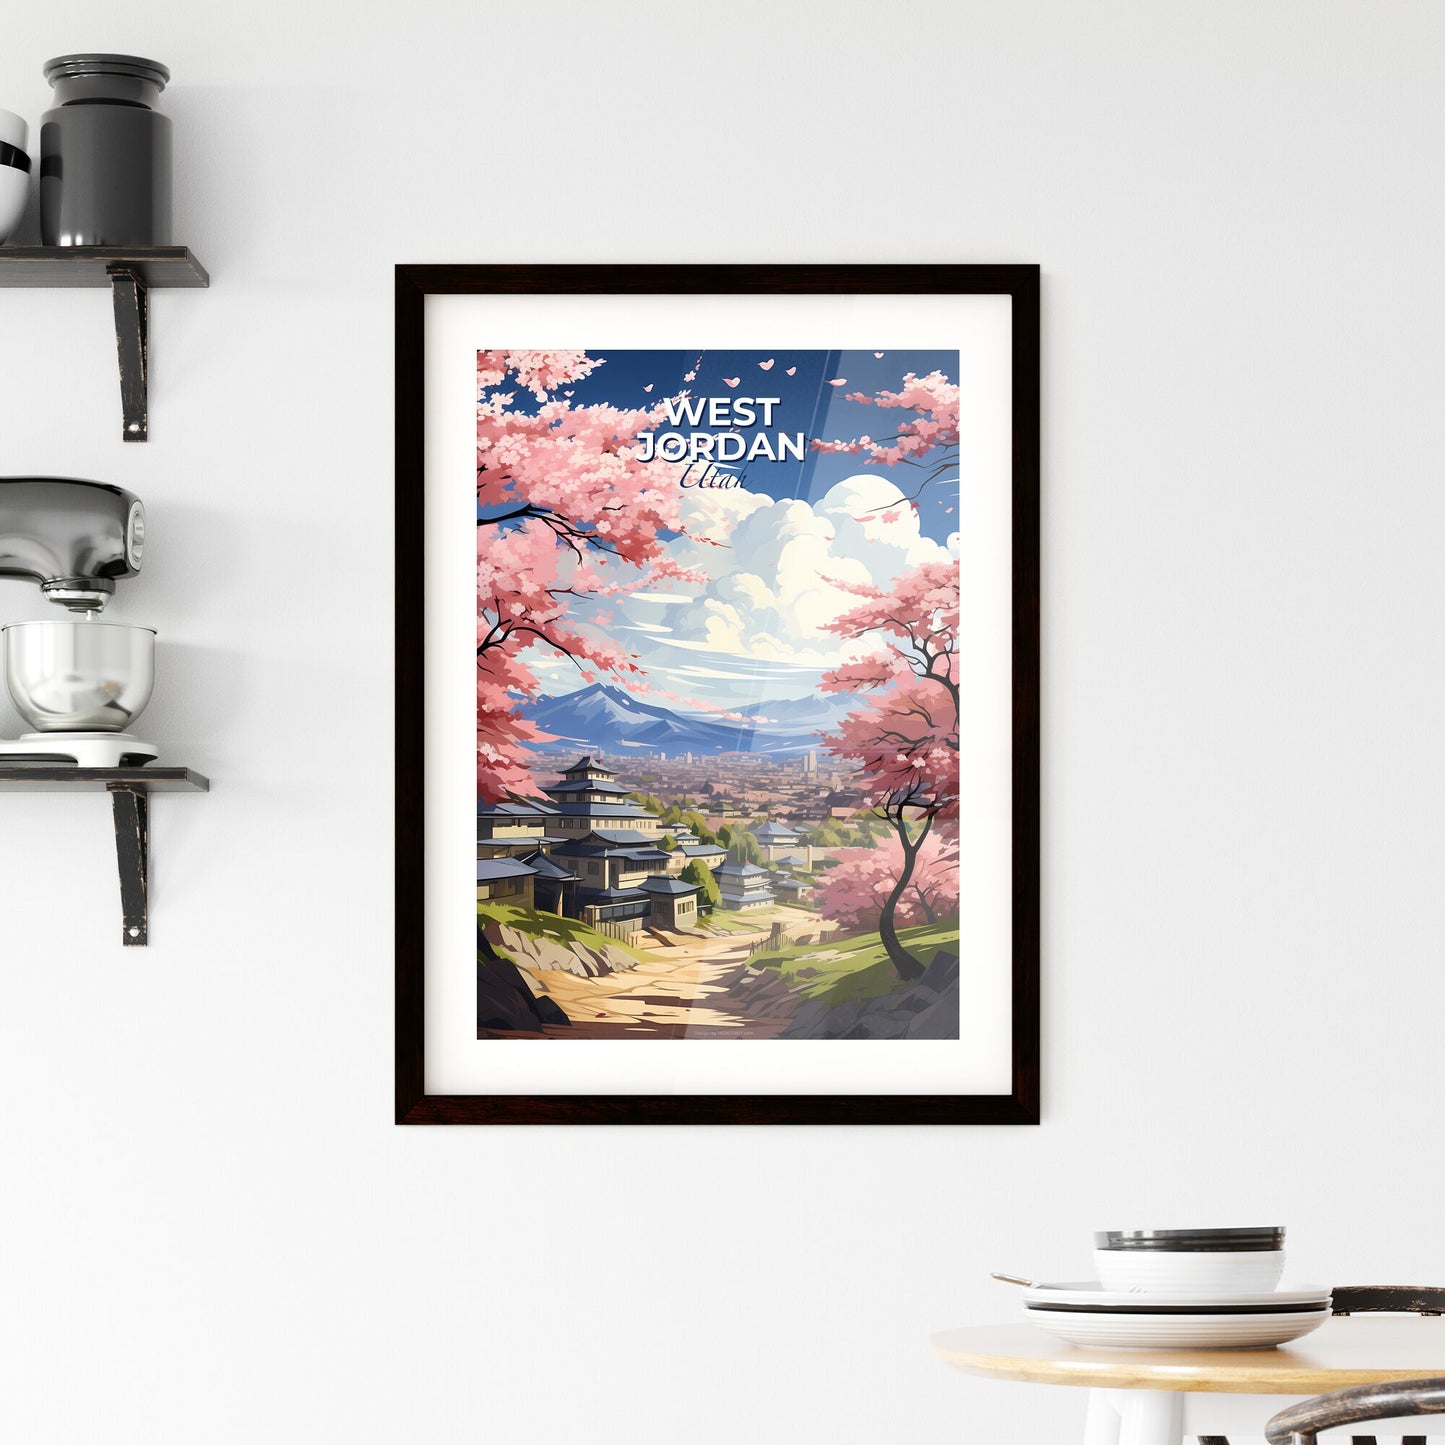 West Jordan, Utah, A Poster of a landscape with pink trees and buildings Default Title